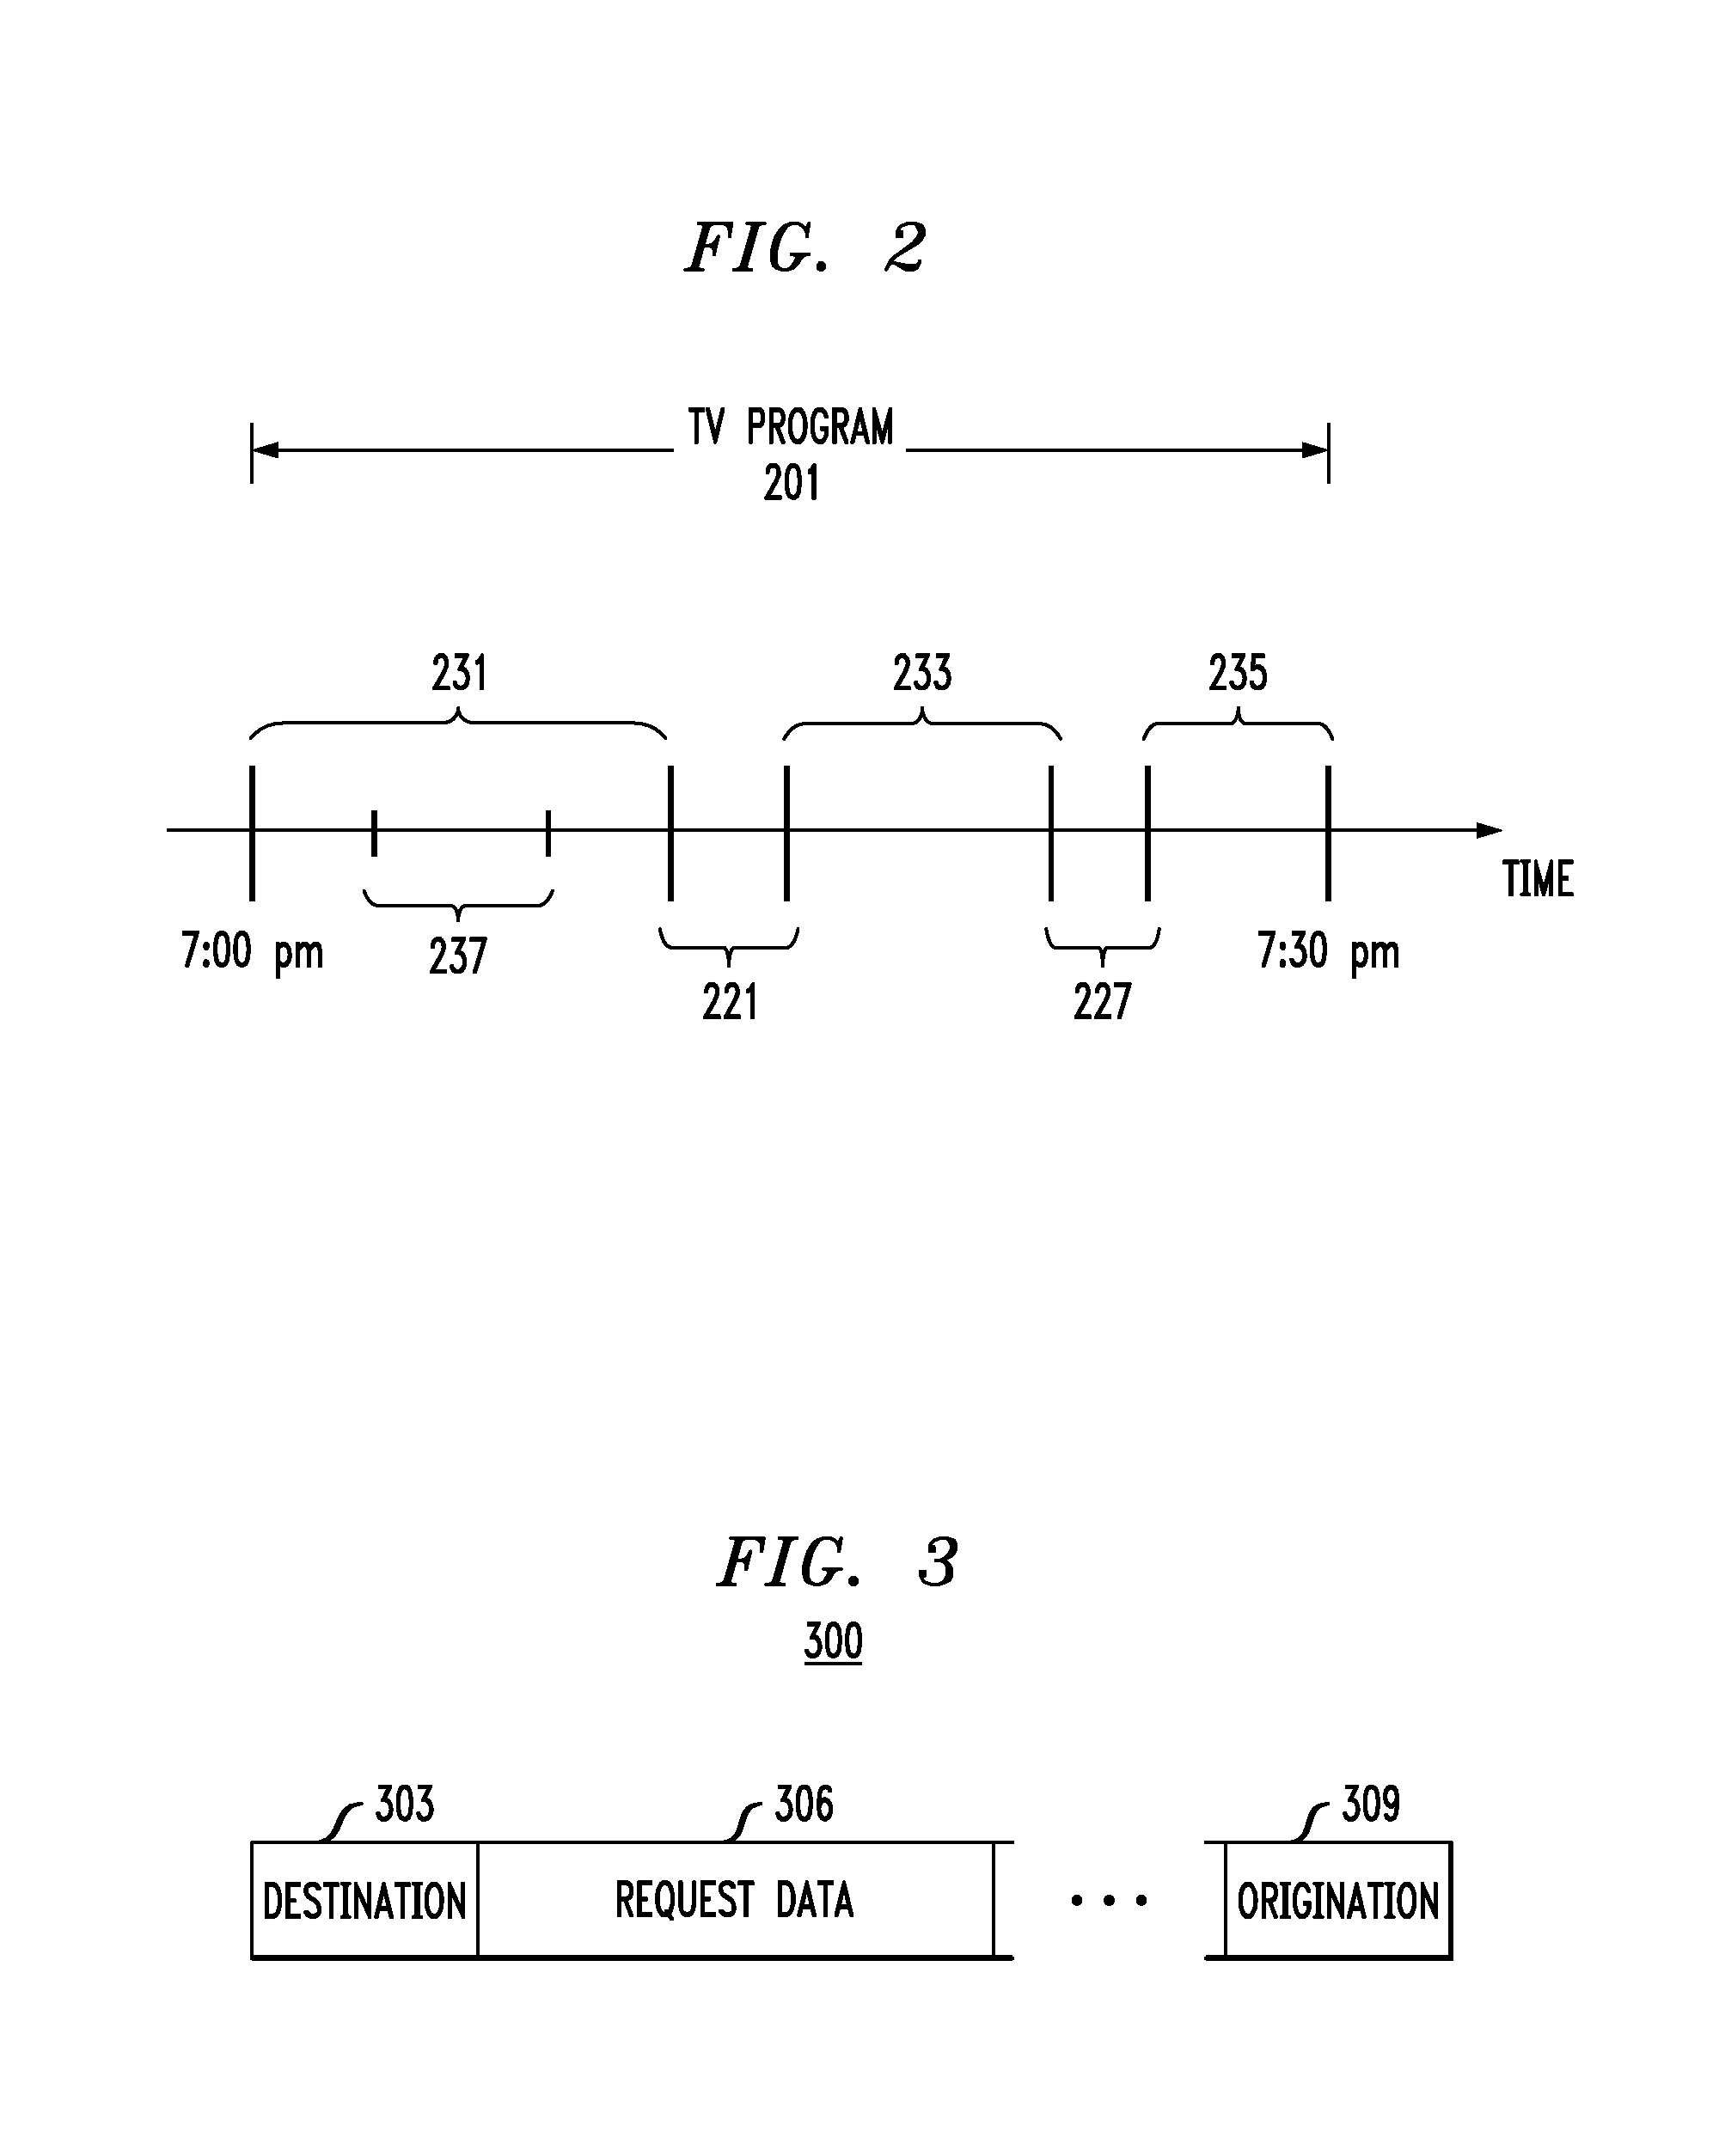 Apparatus And Method For Remote Control Of Digital Video Recorders And The Like